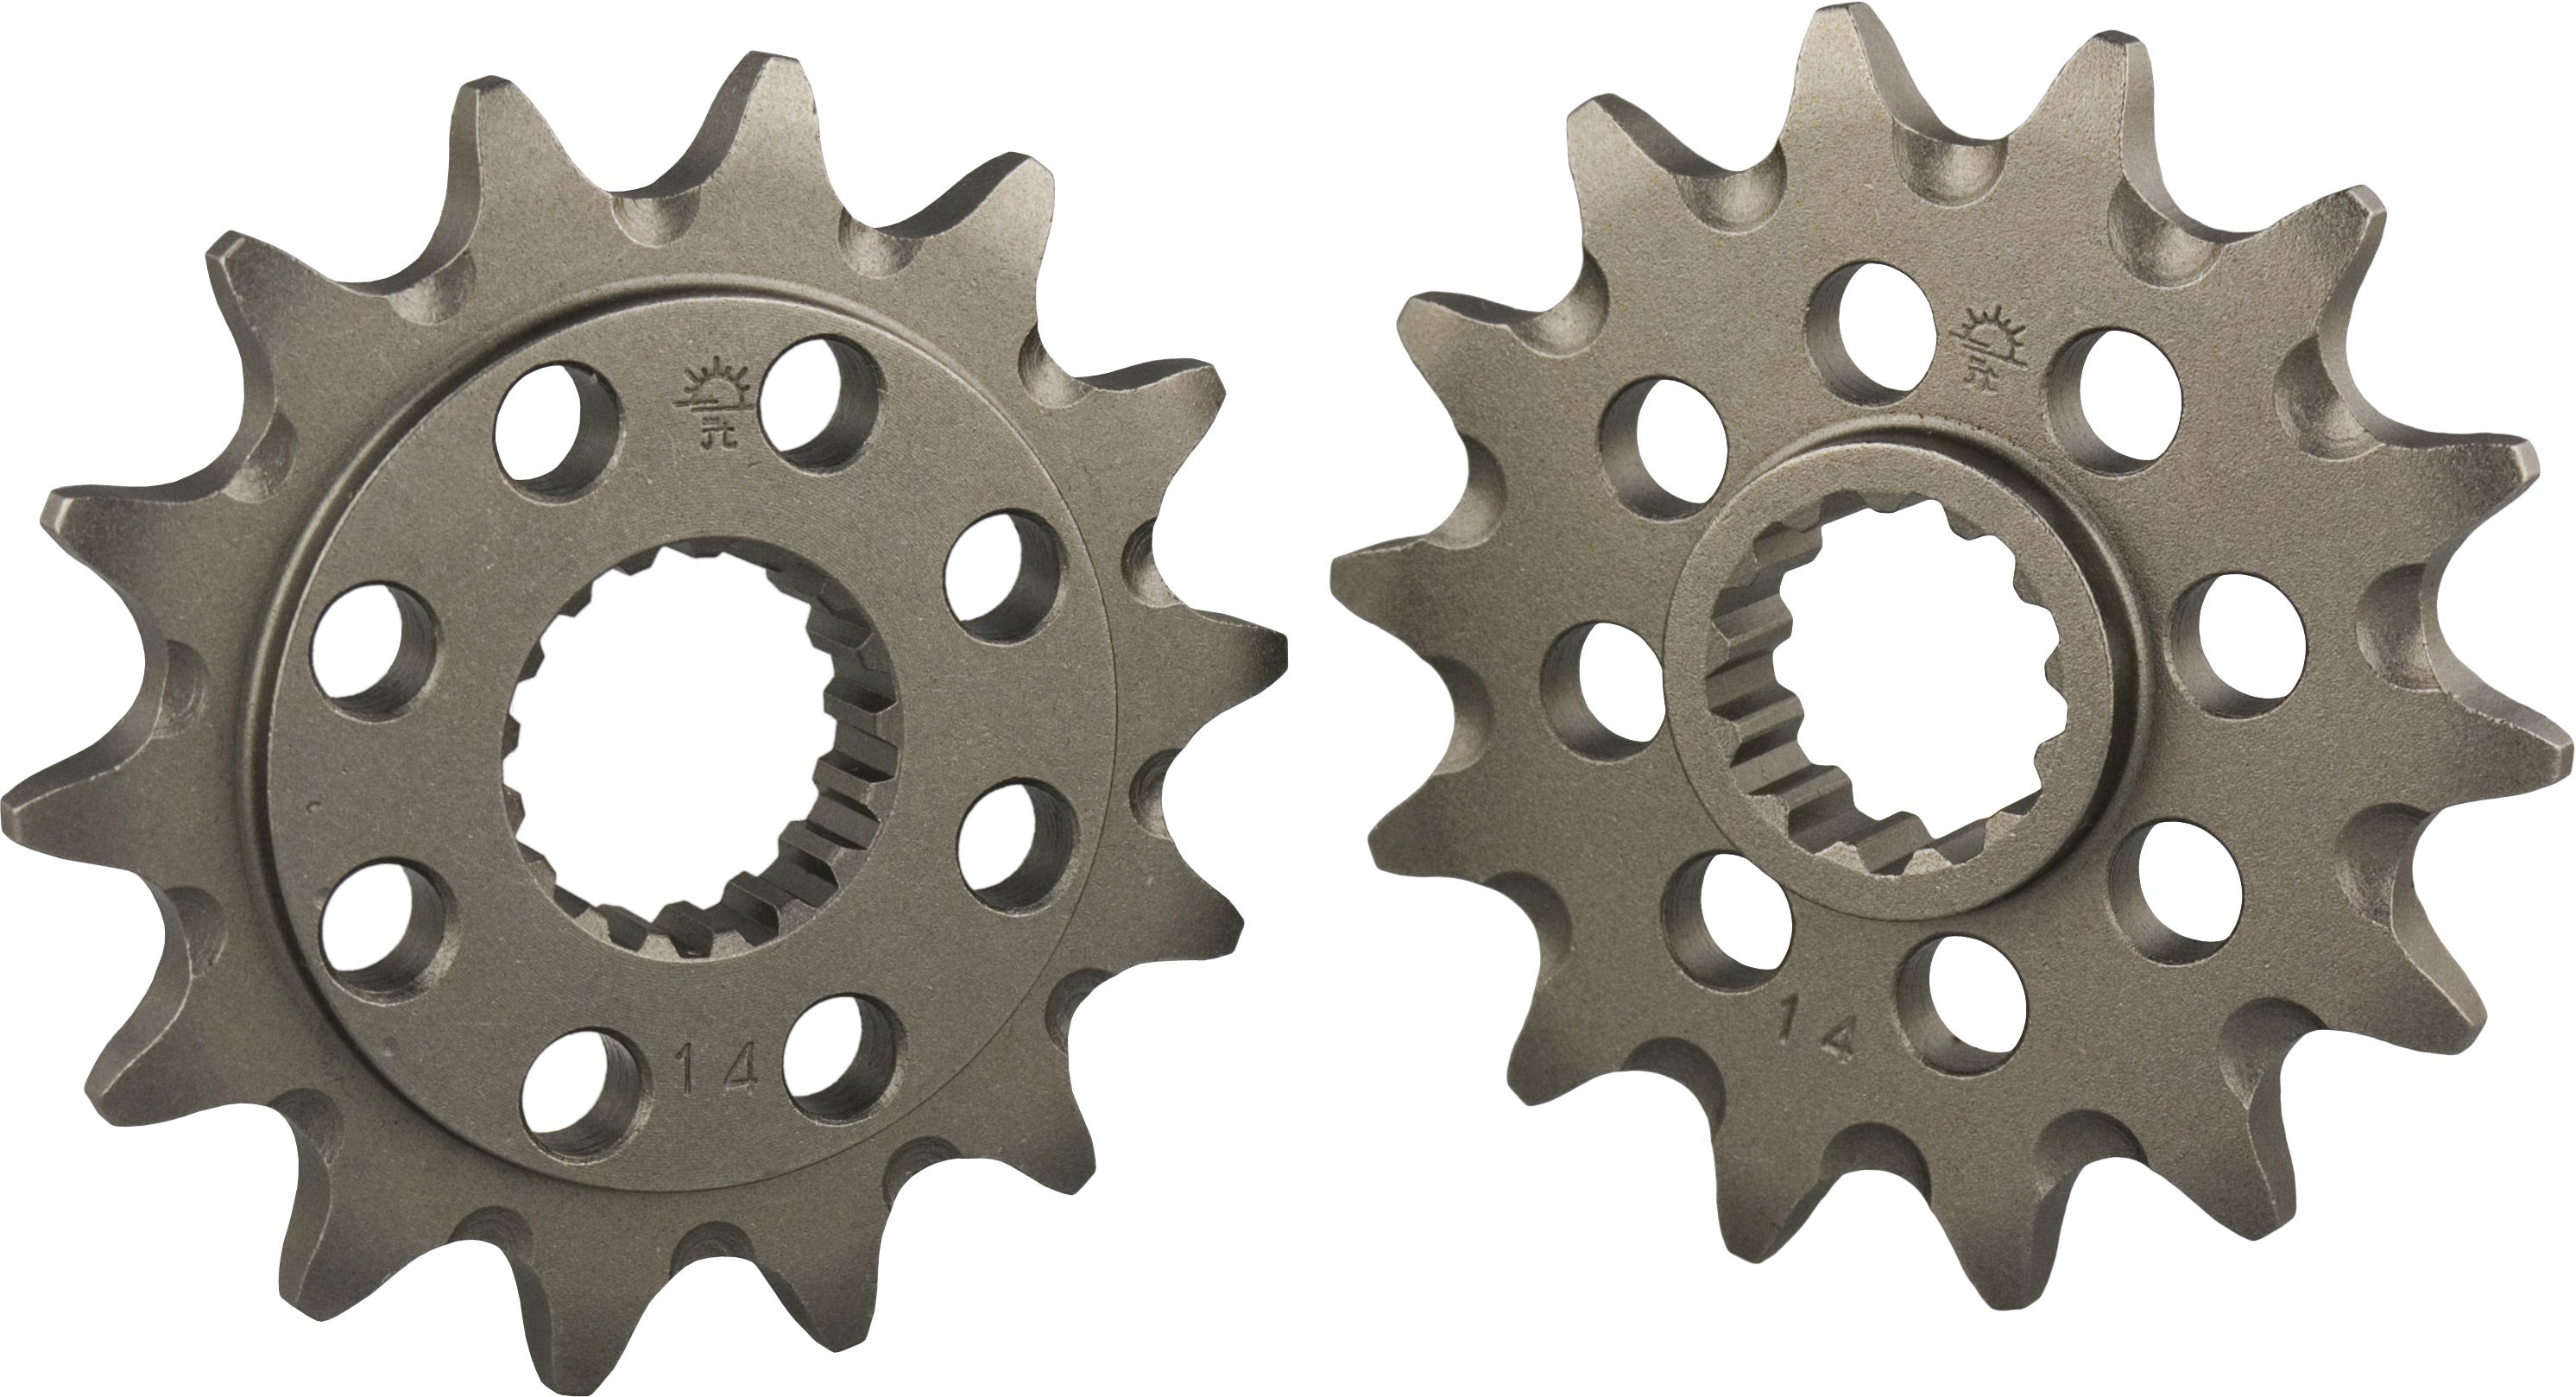 Front Sprocket 14 Tooth for Beta, KTM, HQV, and Husqvarna Motorcycles